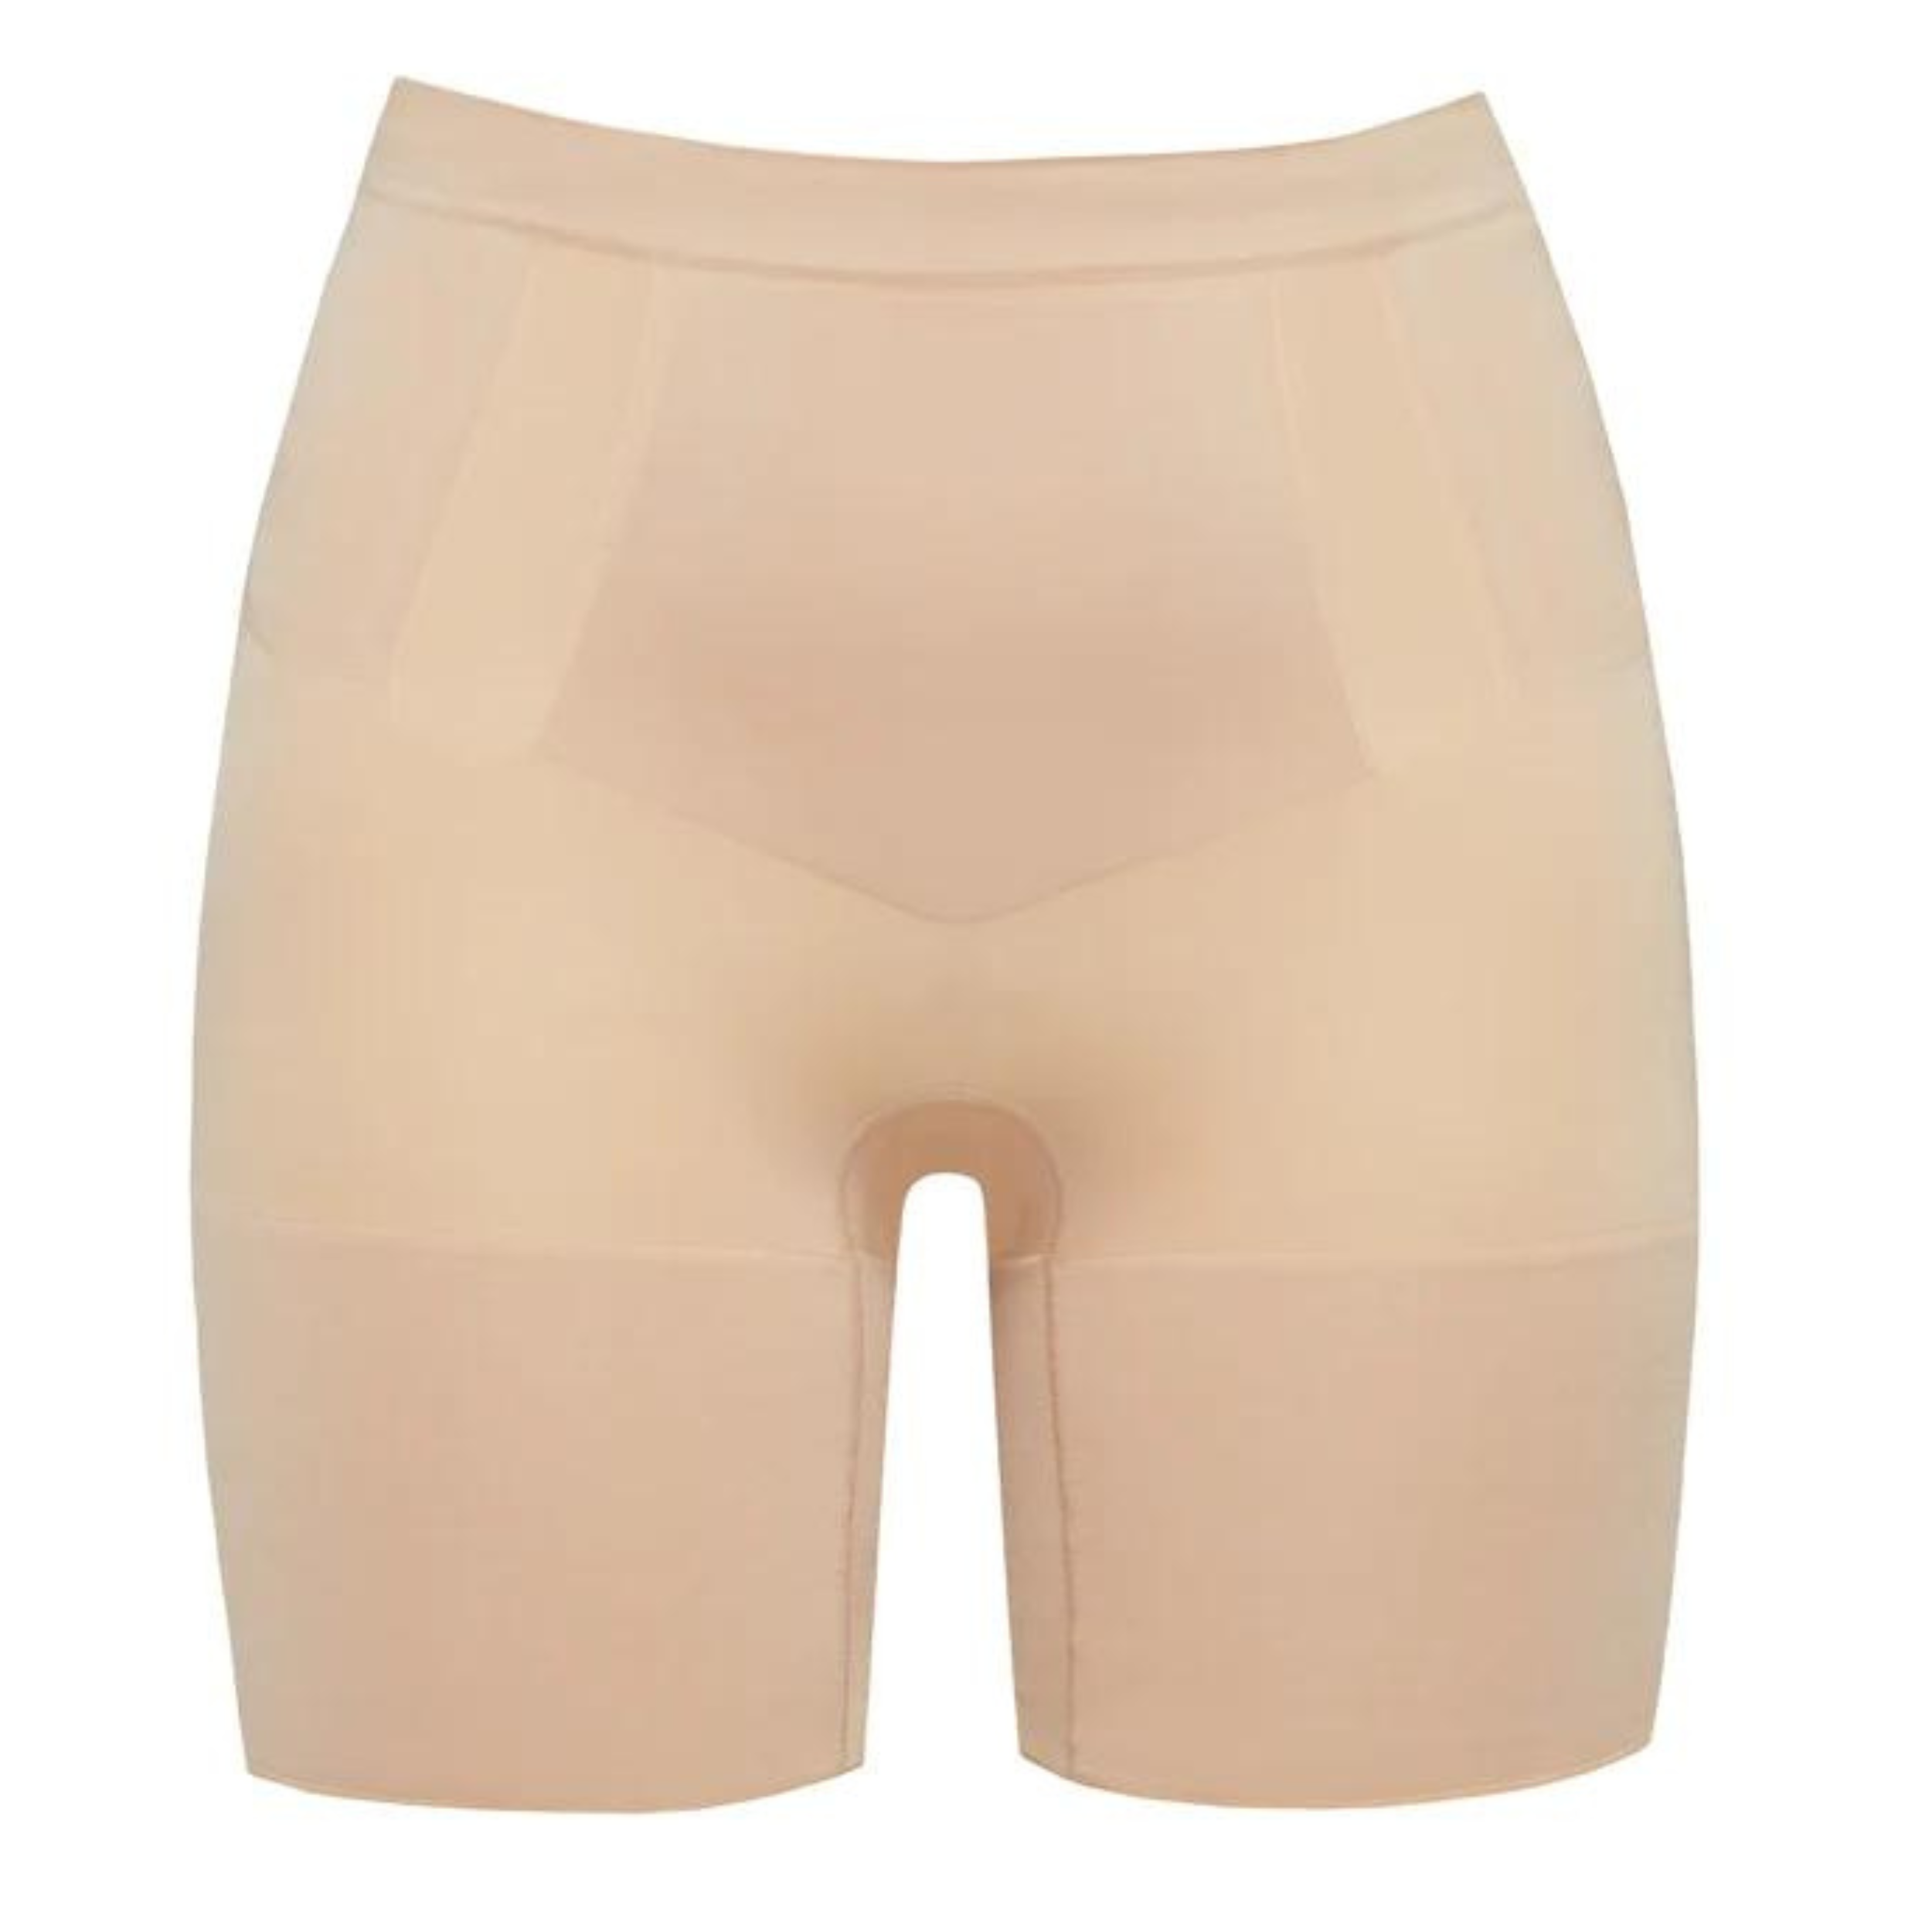 A pair of nude color shorts that are mid thigh length. These shorts are pictured on a white background.